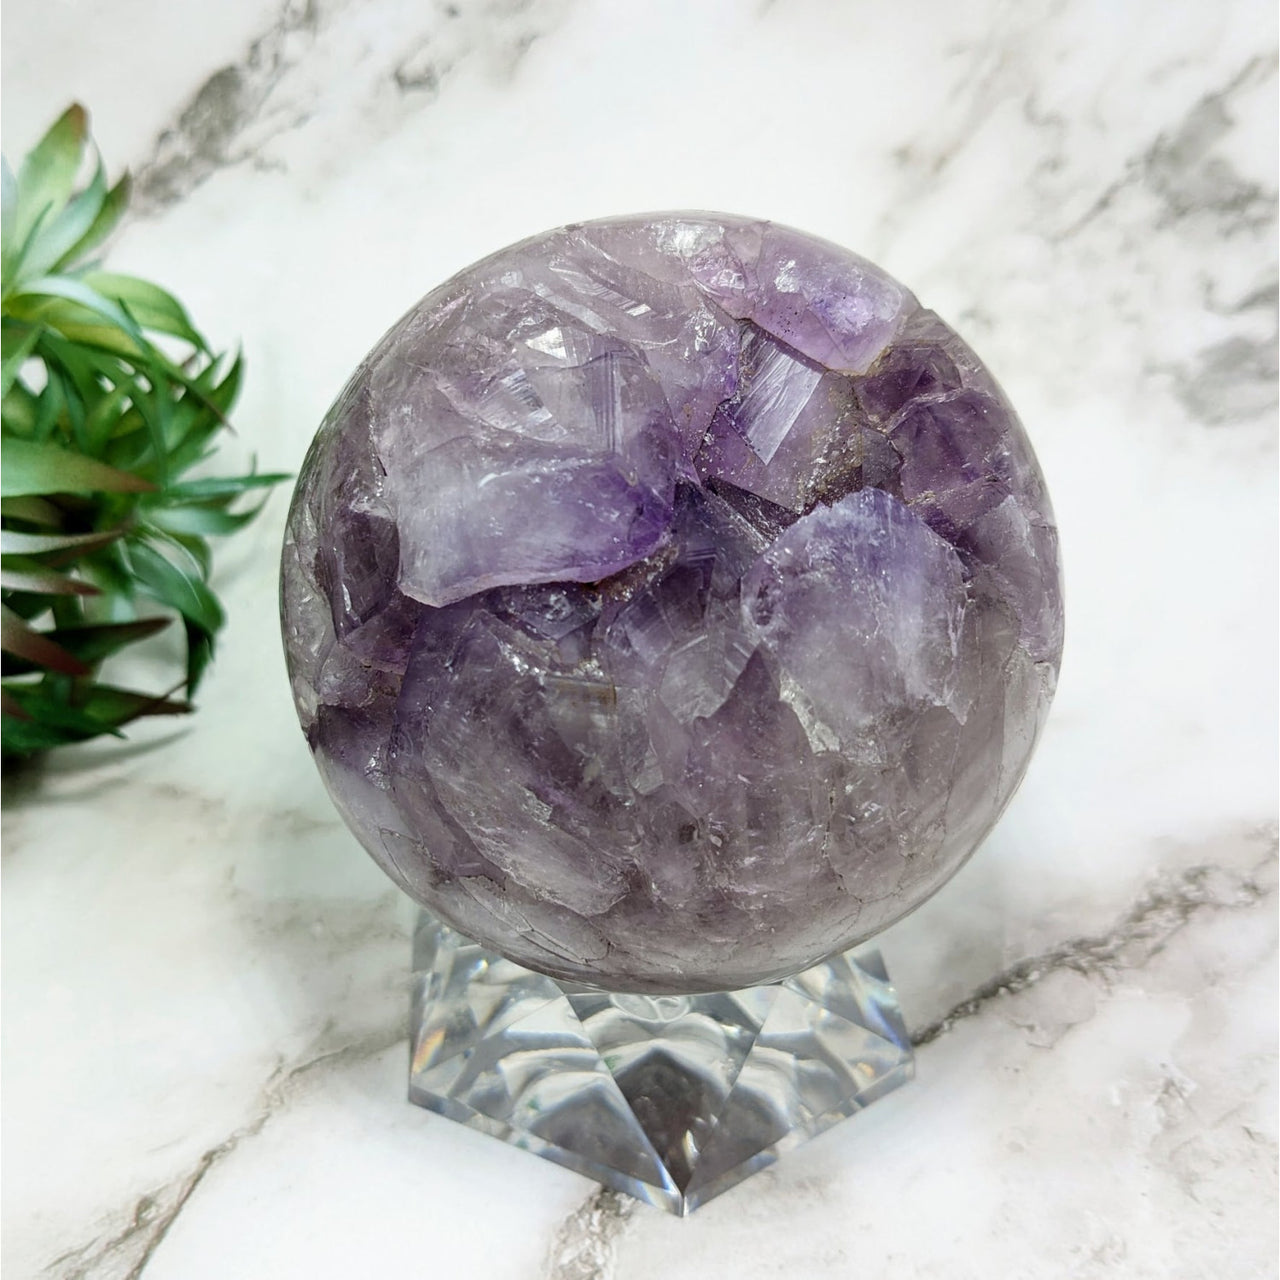 A glowing purple crystal ball on a marble table, Amethyst 3.4’ Sphere #LV4343